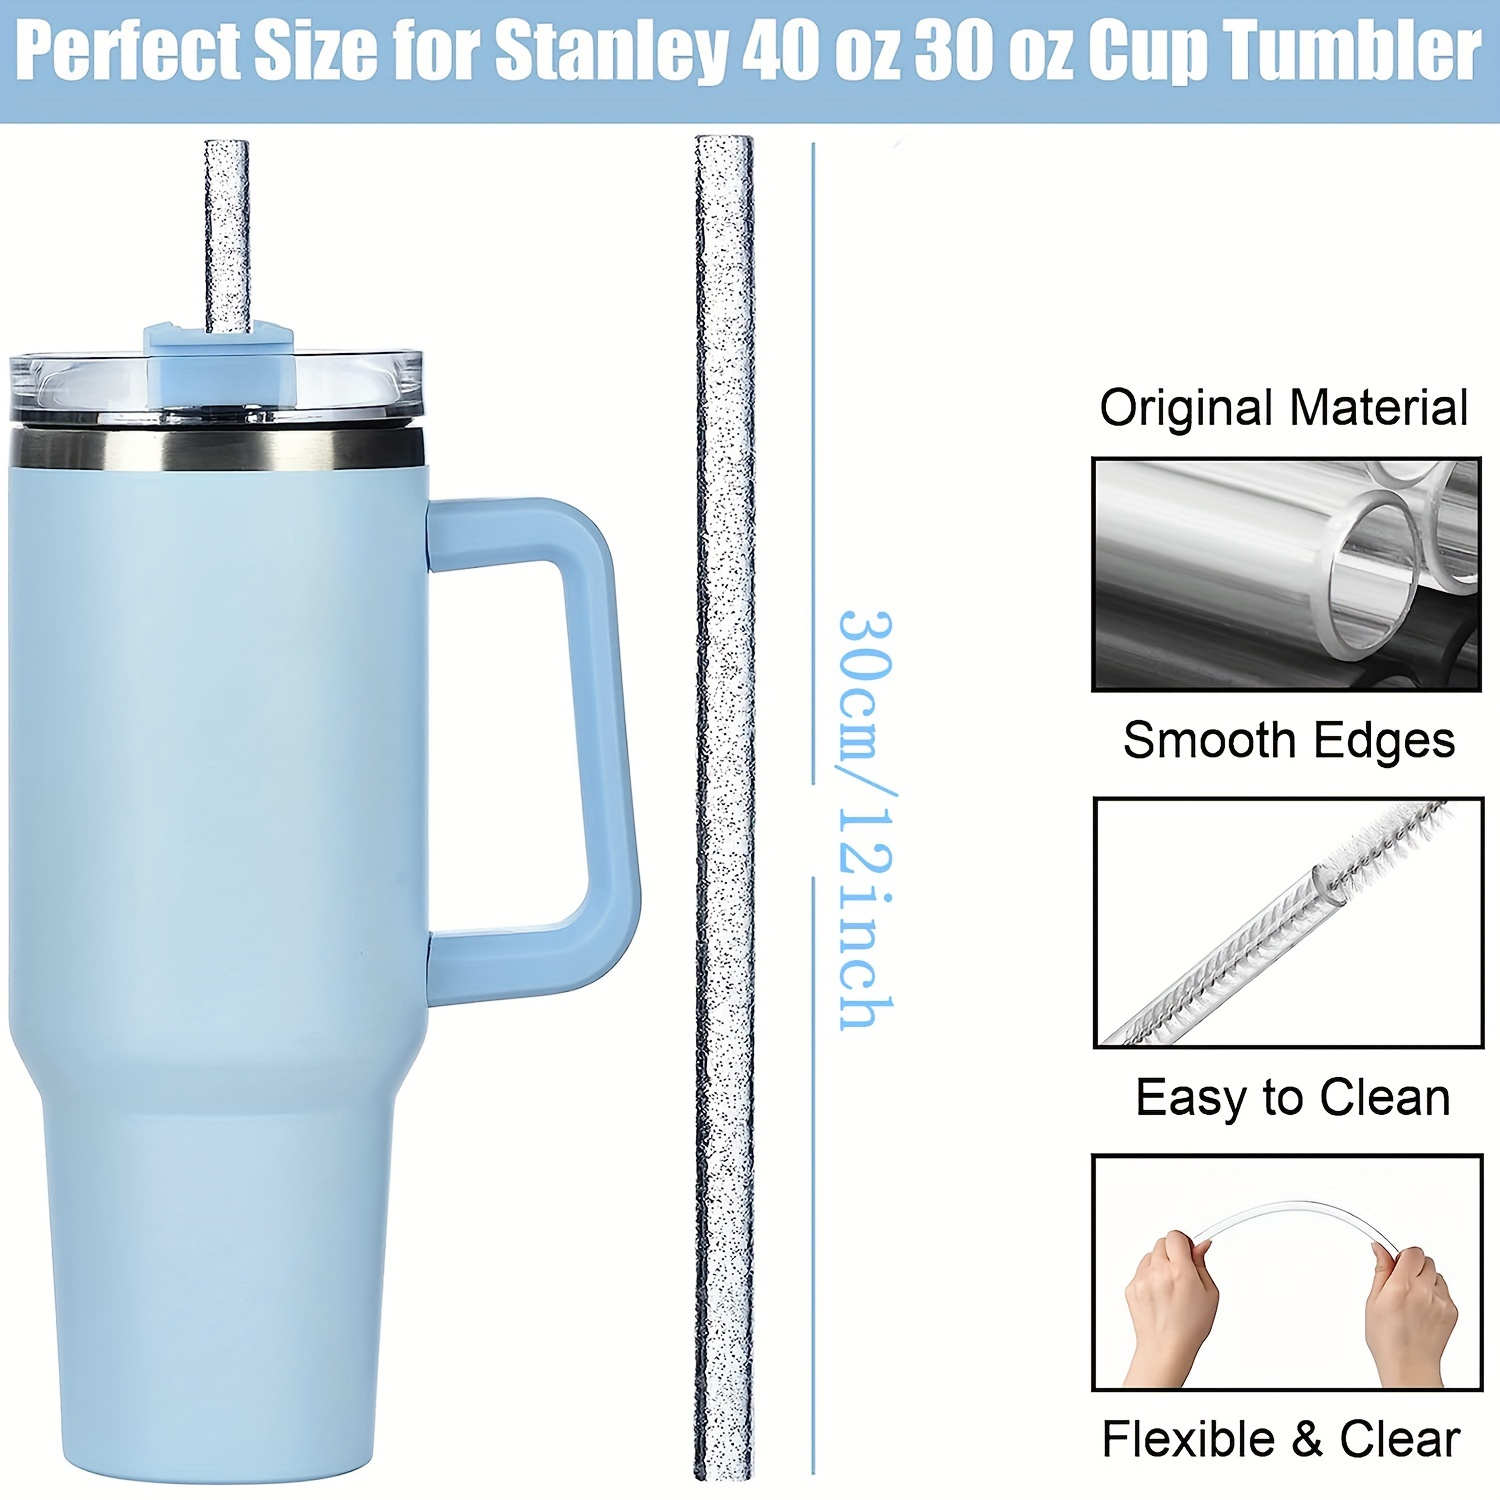 12pcs Replacement Straws for Stanley 40 oz 30 oz Tumbler Cup Reusable Straws  Plastic Straws with Cleaning Brush for Stanley Adventure Travel Tumbler  with Handle Long Straws for Stanley Cup Accessories 